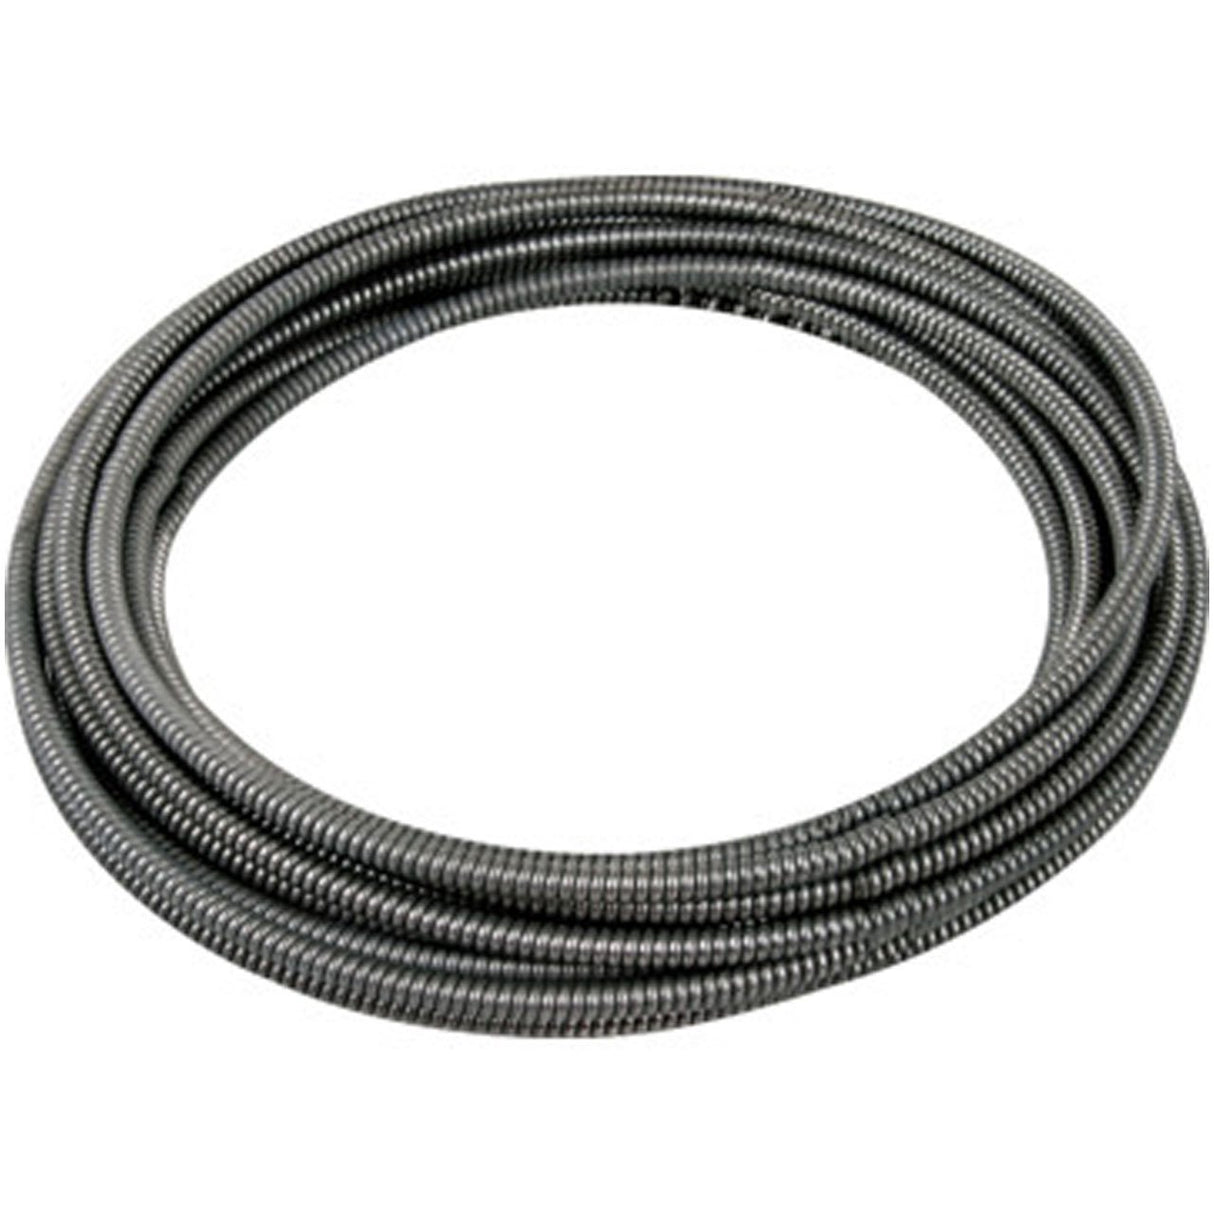 General Wire L-50FL1-A-DH 50' x 5/16" Down Head Replacement Flexicore Cables for Hand Tools (Handles Sold Separately)